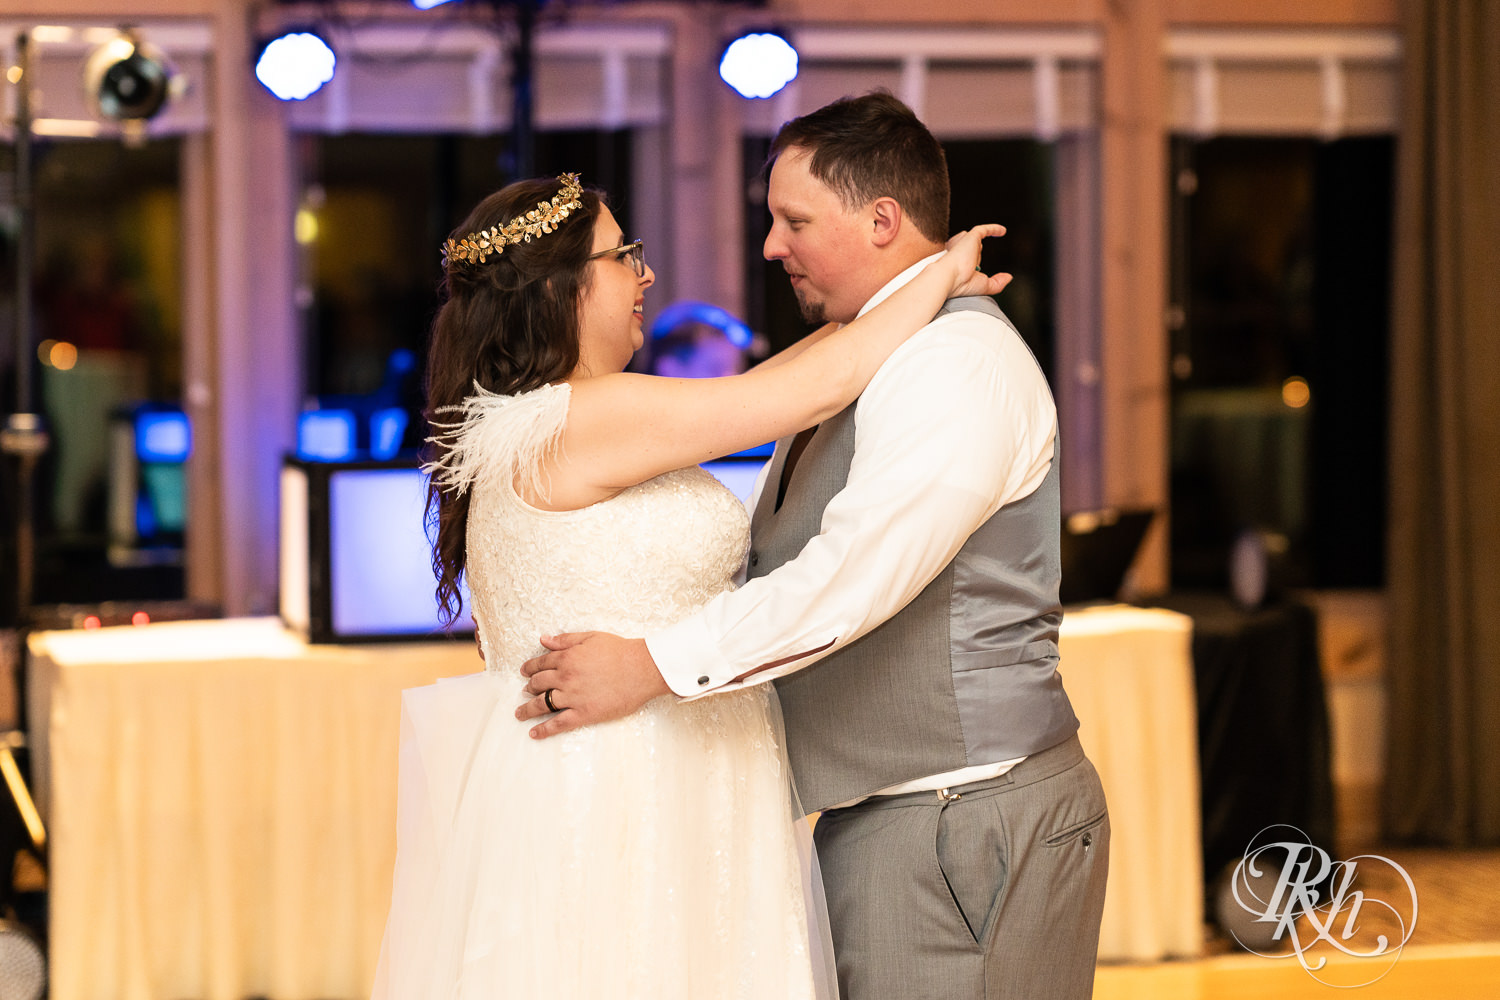 Bride and groom share first dance at Bunker Hills Event Center in Coon Rapids, Minnesota.